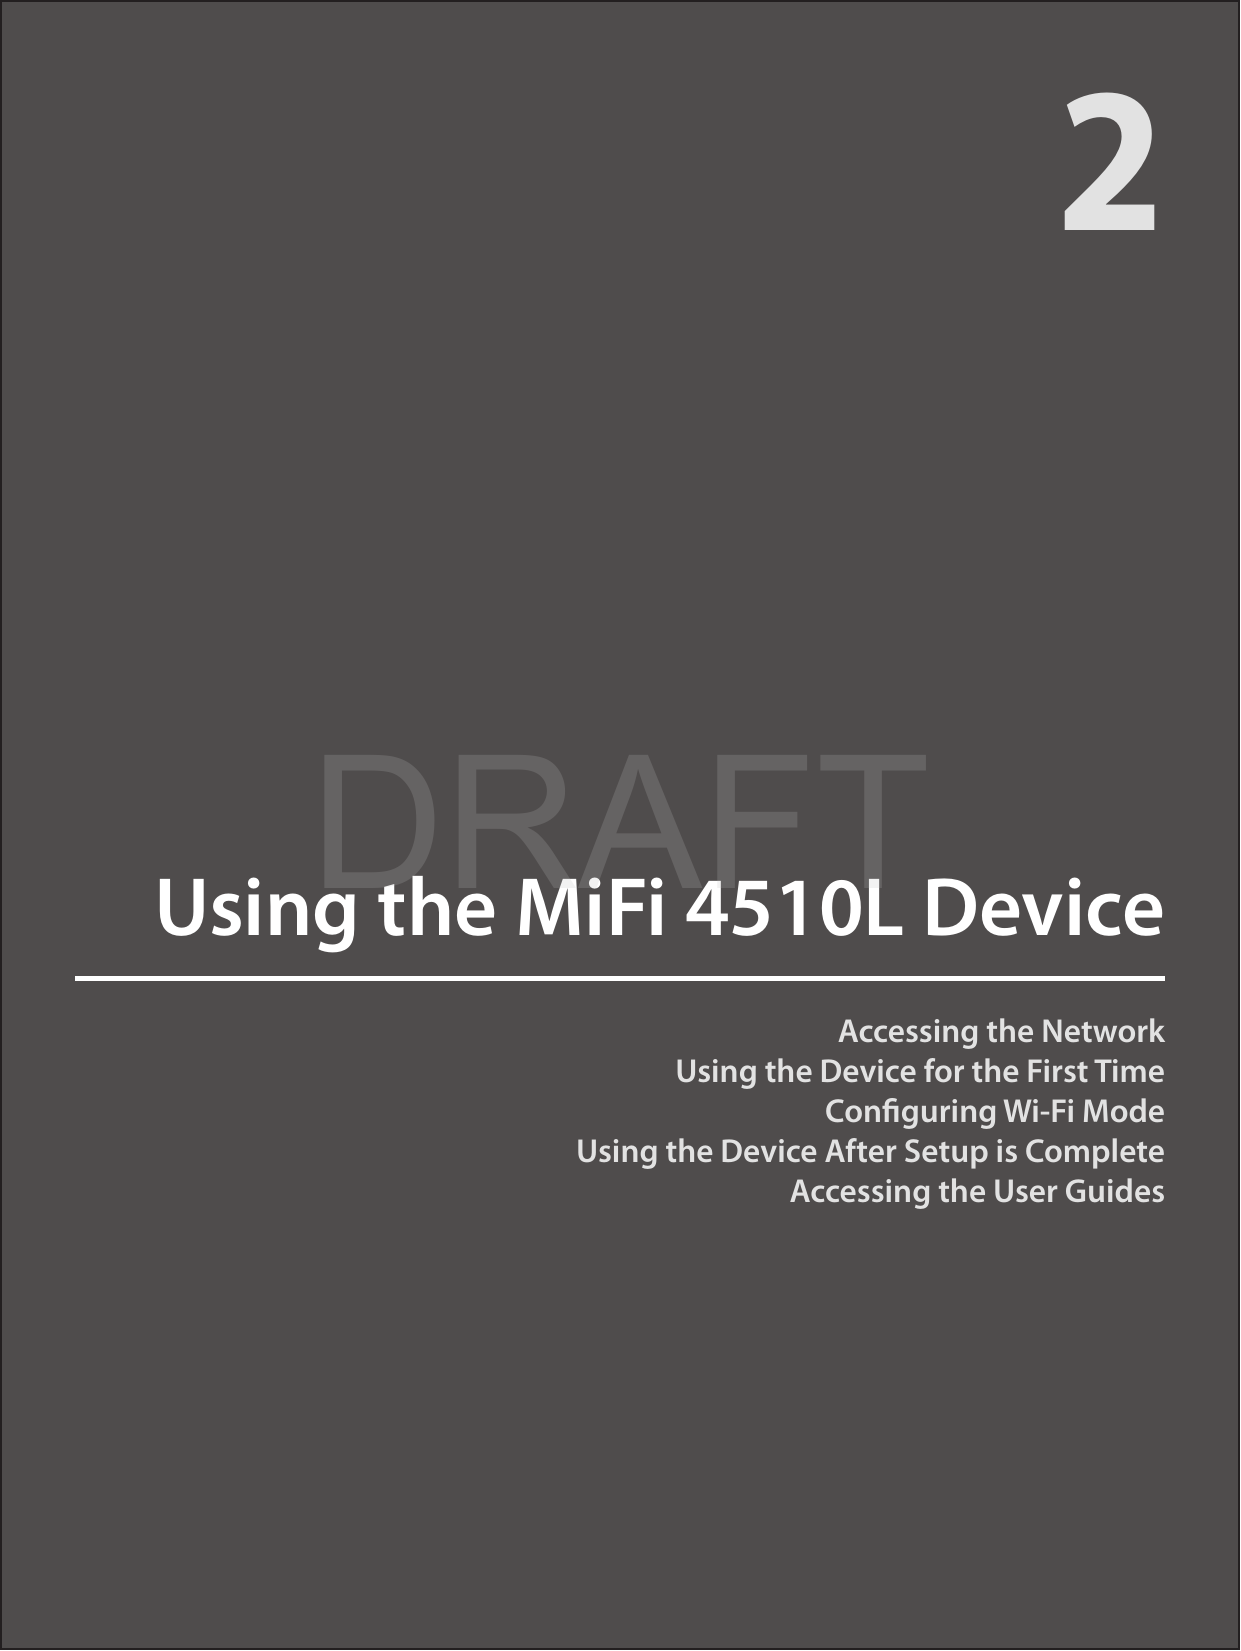 Accessing the NetworkUsing the Device for the First TimeConguring Wi-Fi ModeUsing the Device After Setup is CompleteAccessing the User GuidesUsing the MiFi 4510L Device2DRAFT